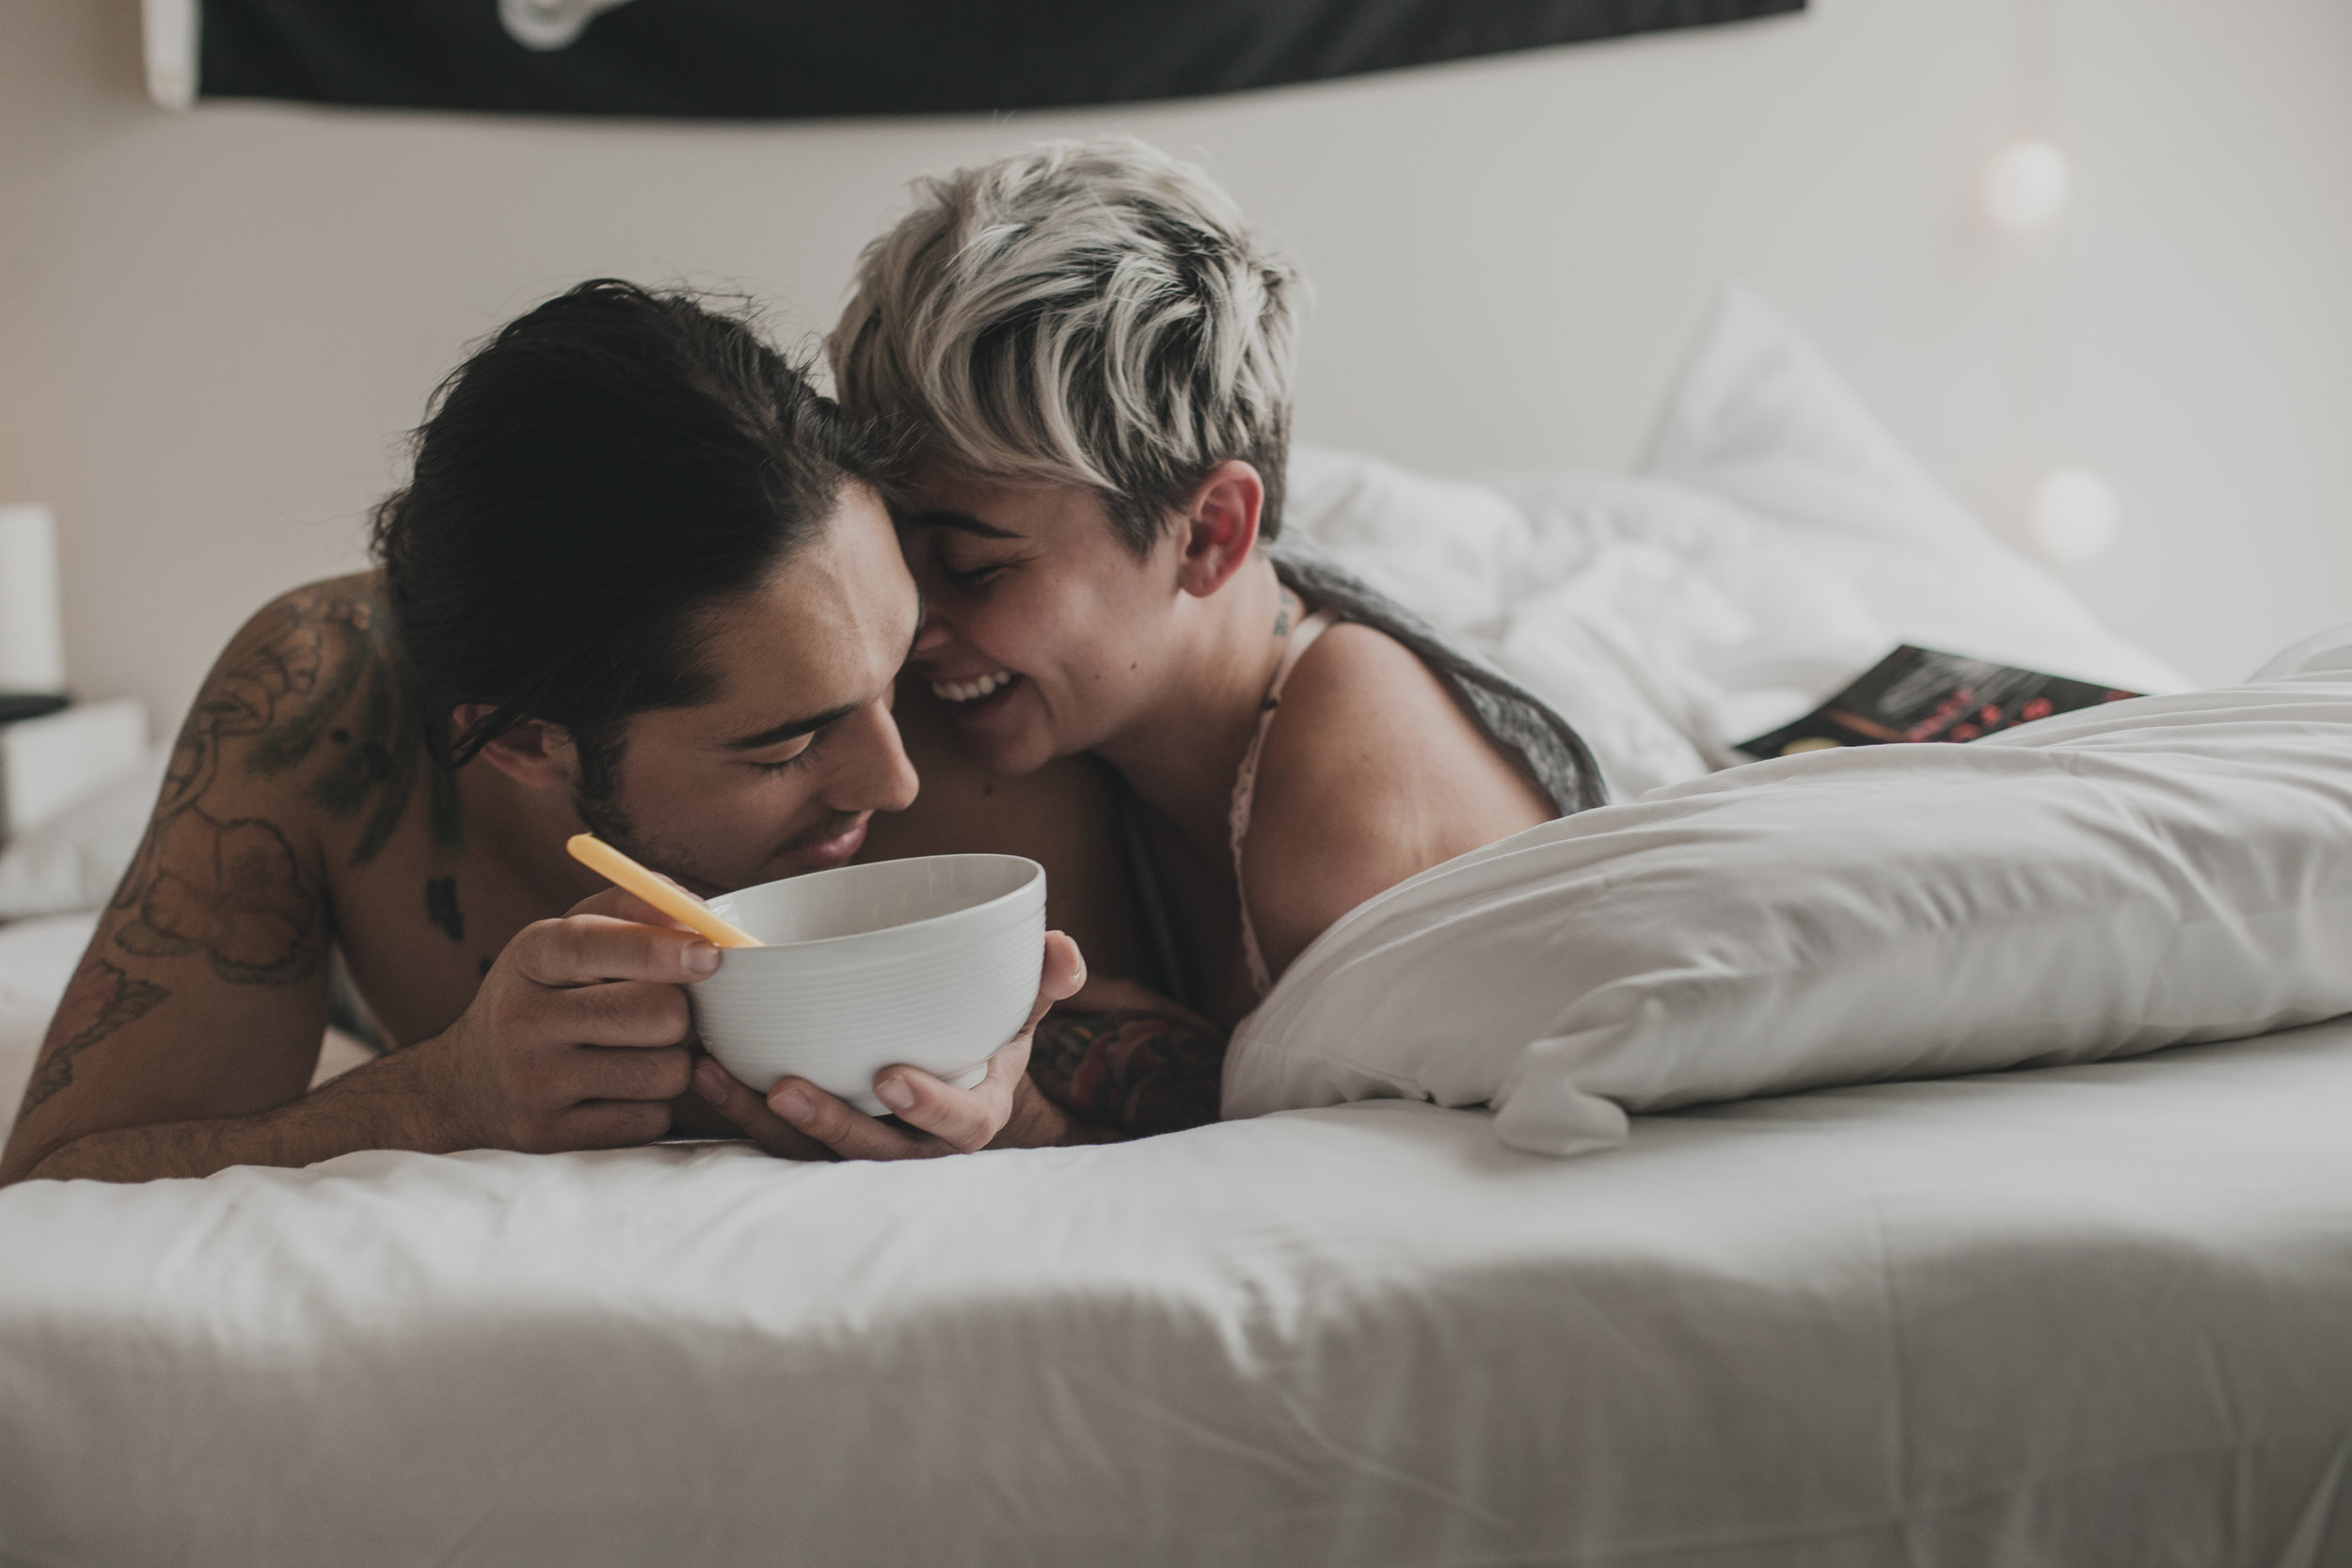 © duston-todd-lifestyle-cereal-bed-intimacy.jpg